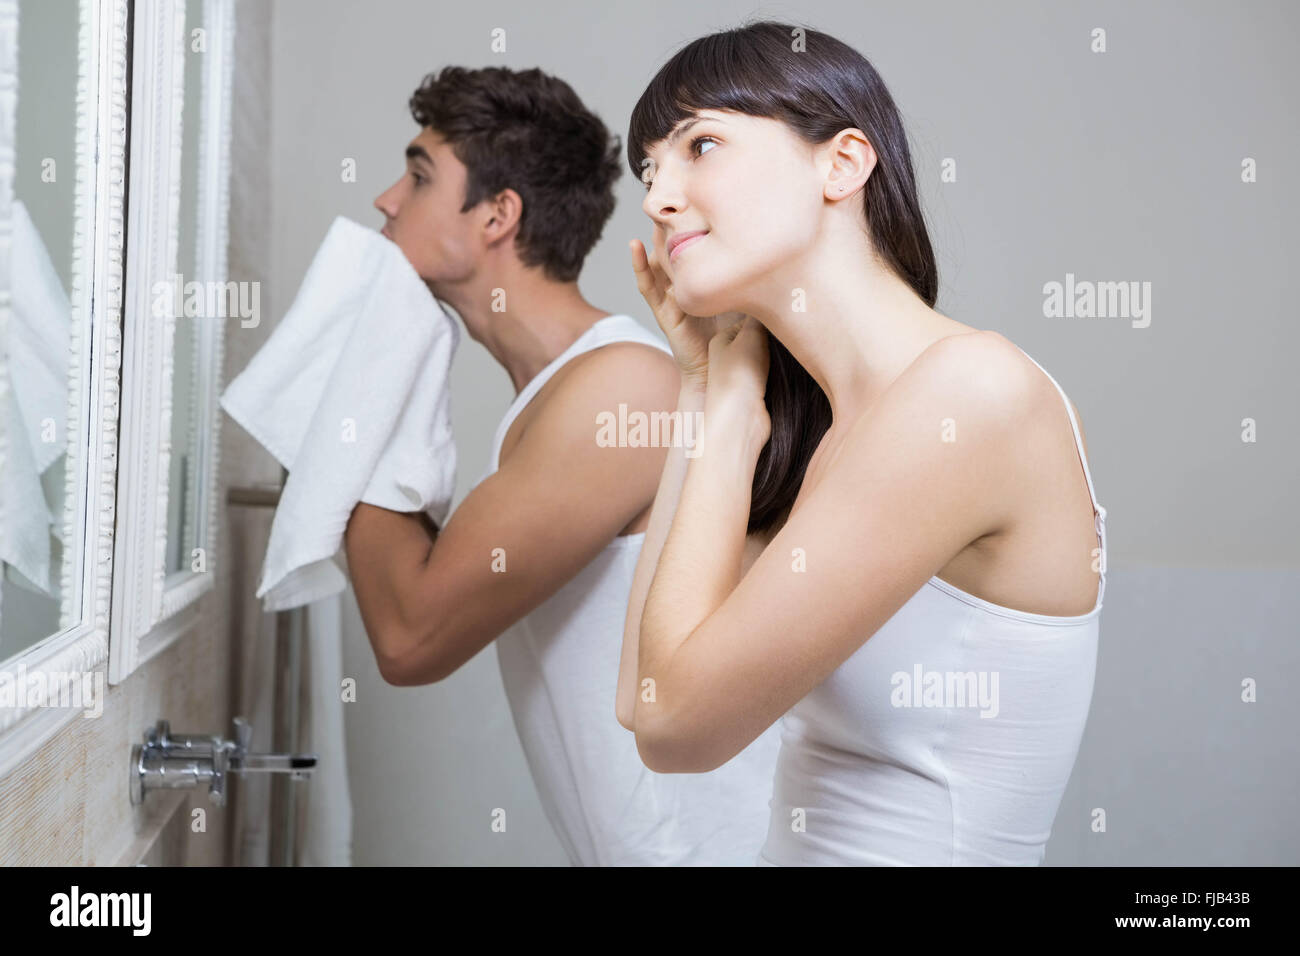 Bathroom routine for young couple Stock Photo